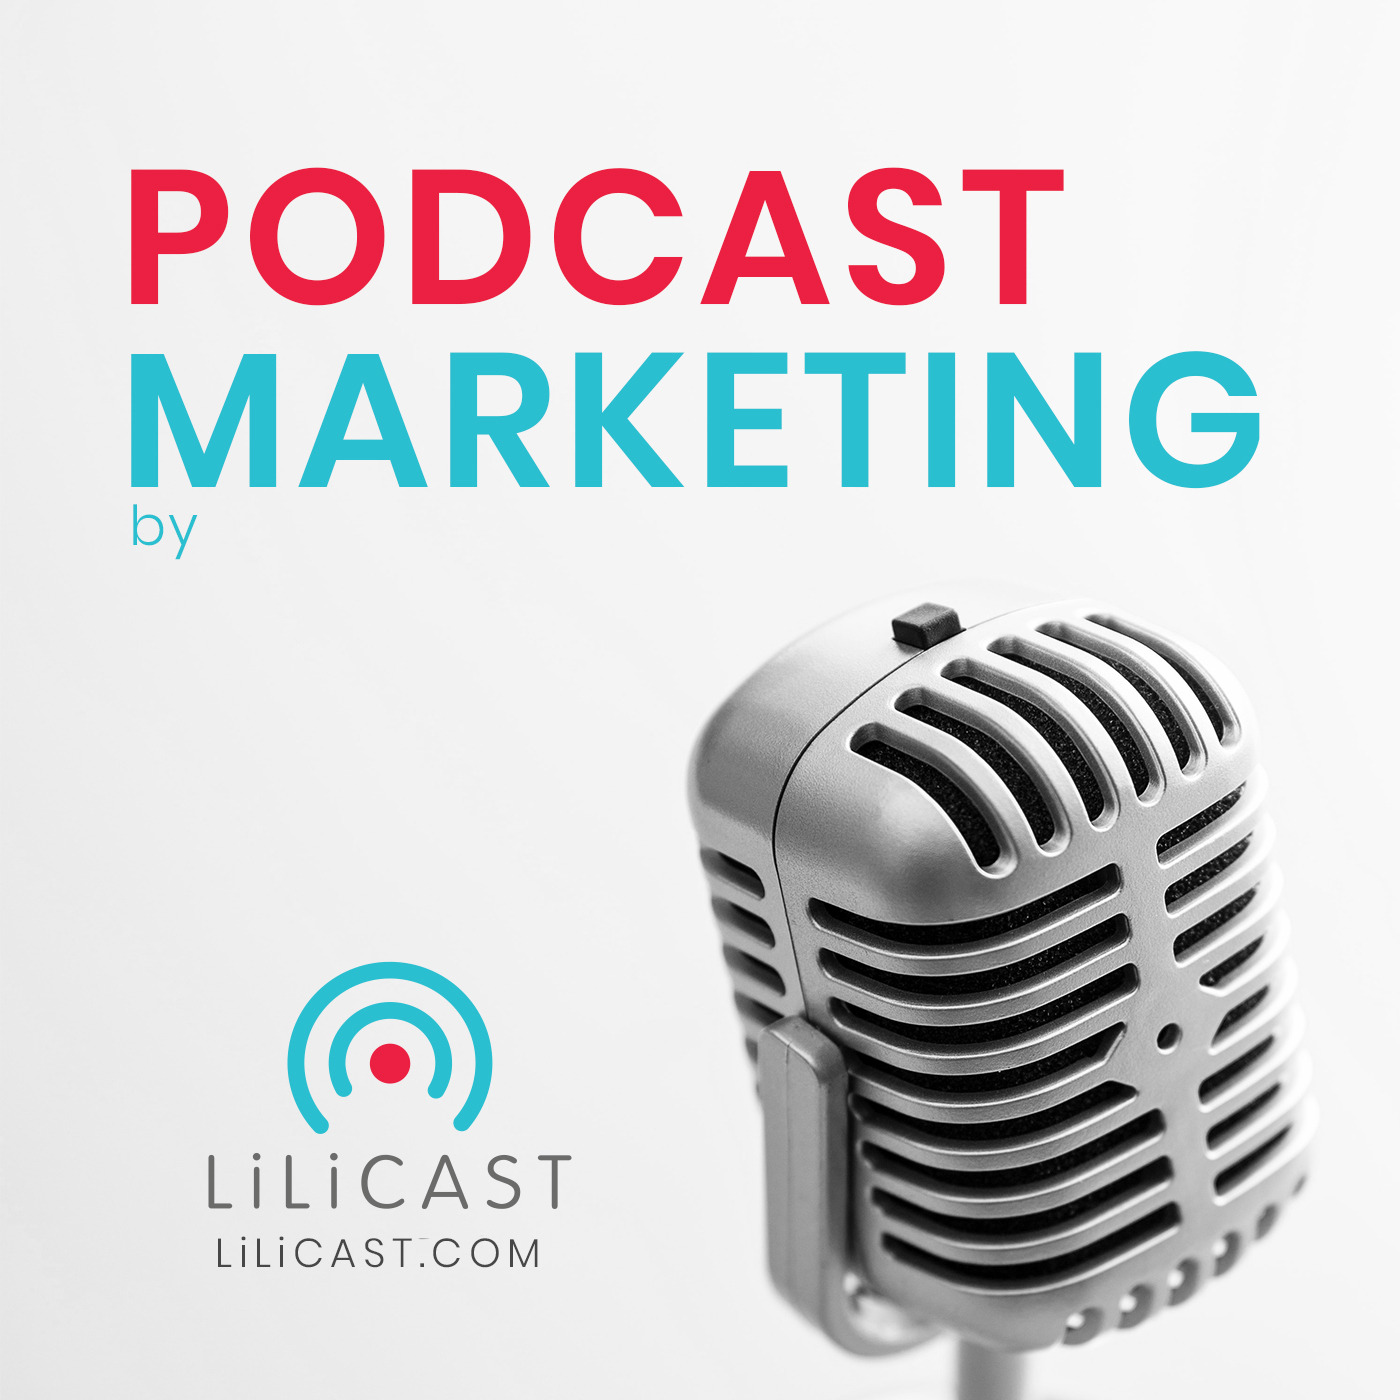 Podcast Marketing by LiLiCAST